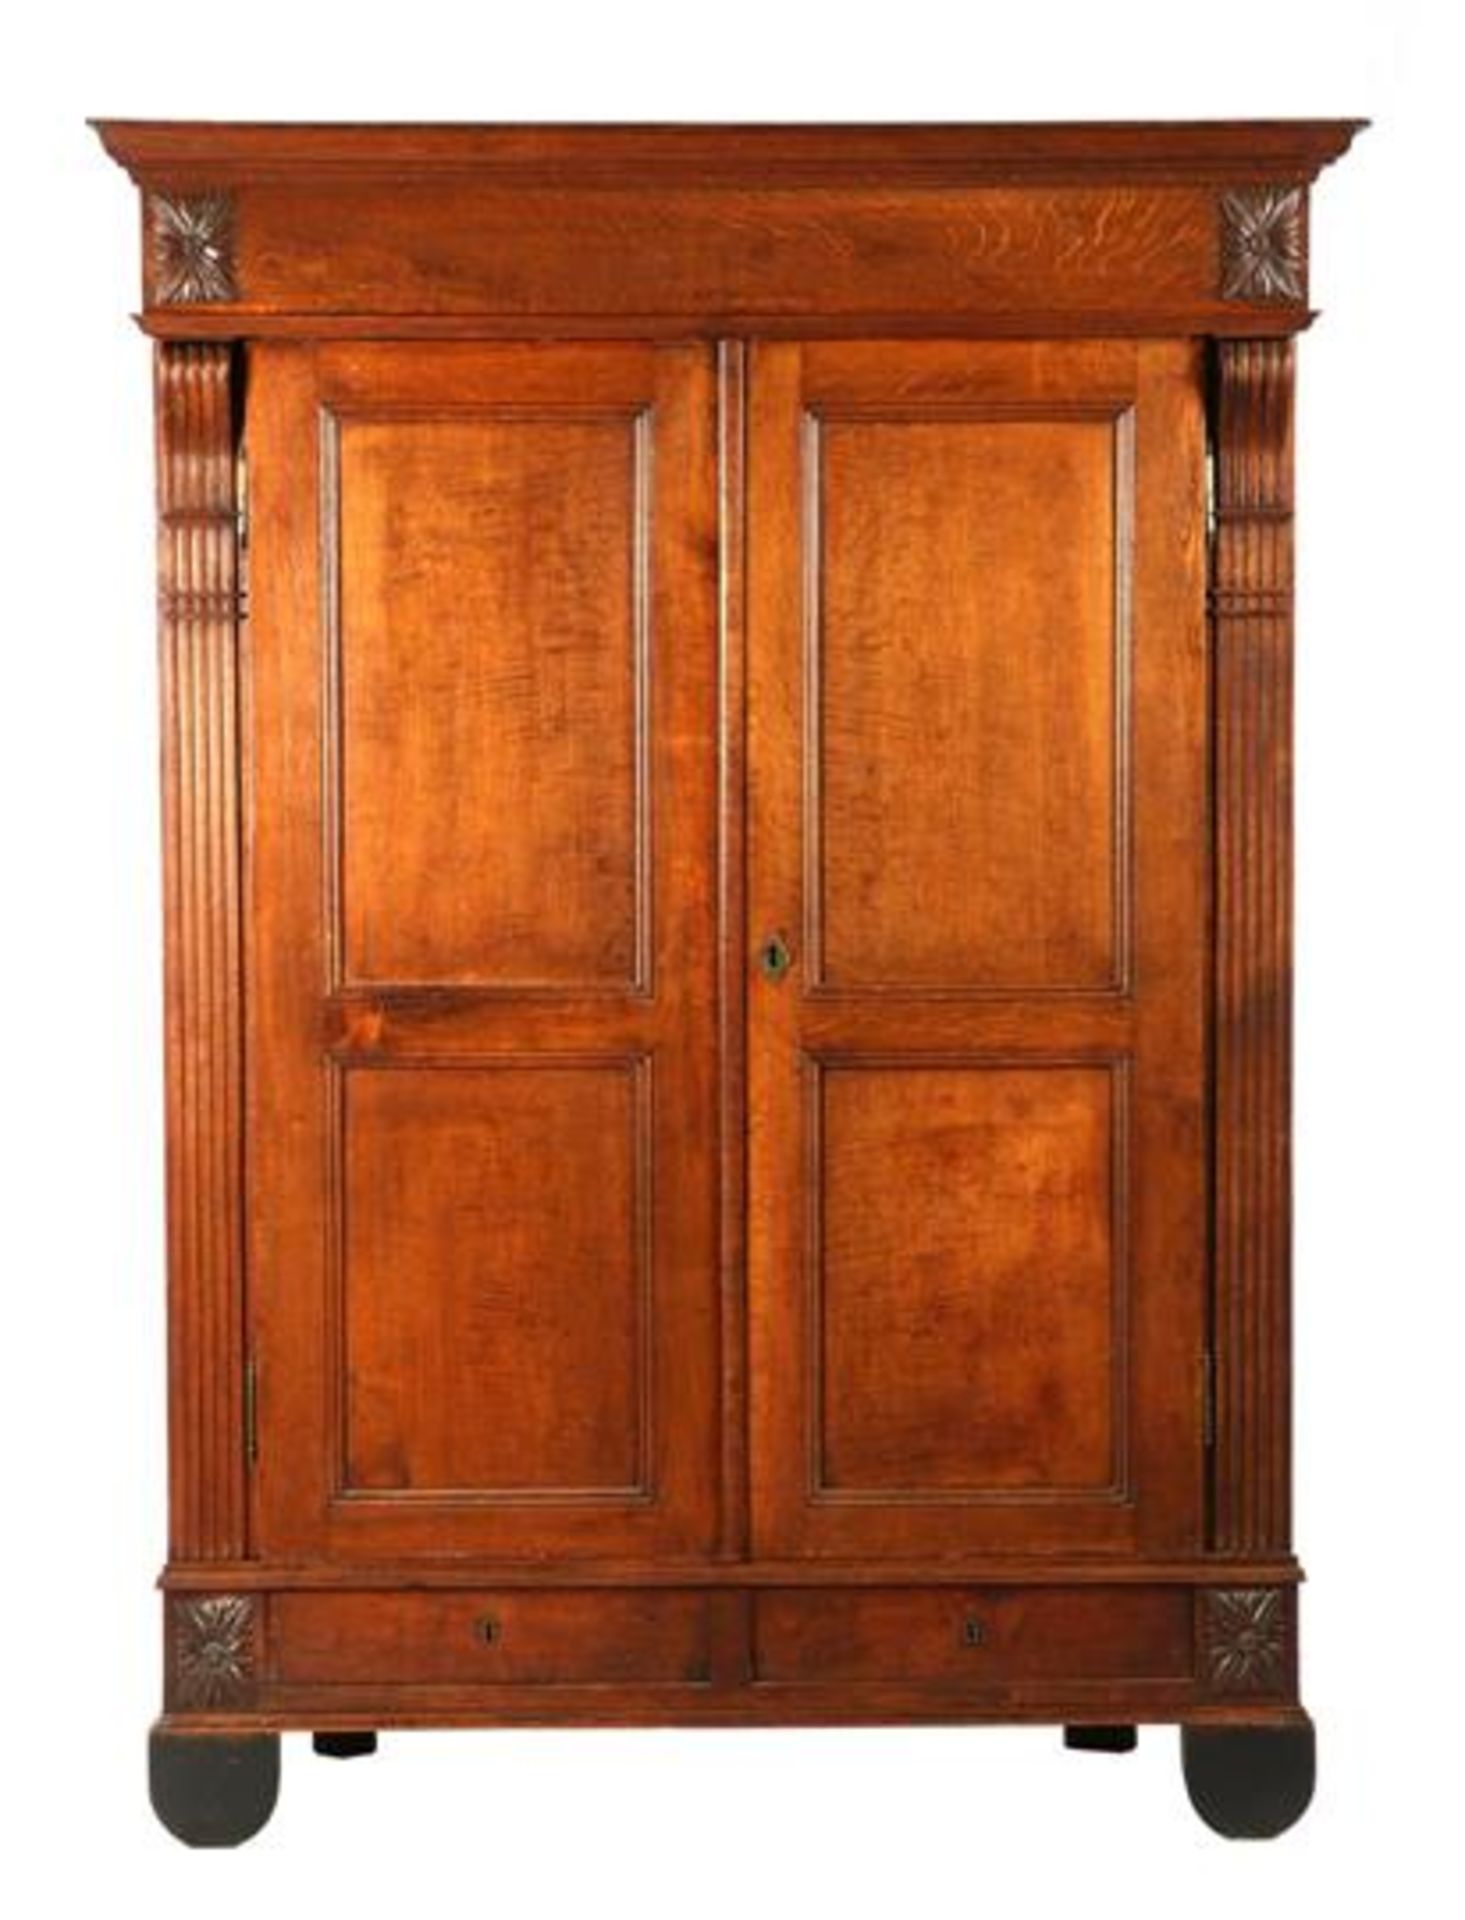 Antique solid oak 2-door wardrobe with 2 drawers, ornaments on the corners and fluted uprights 214